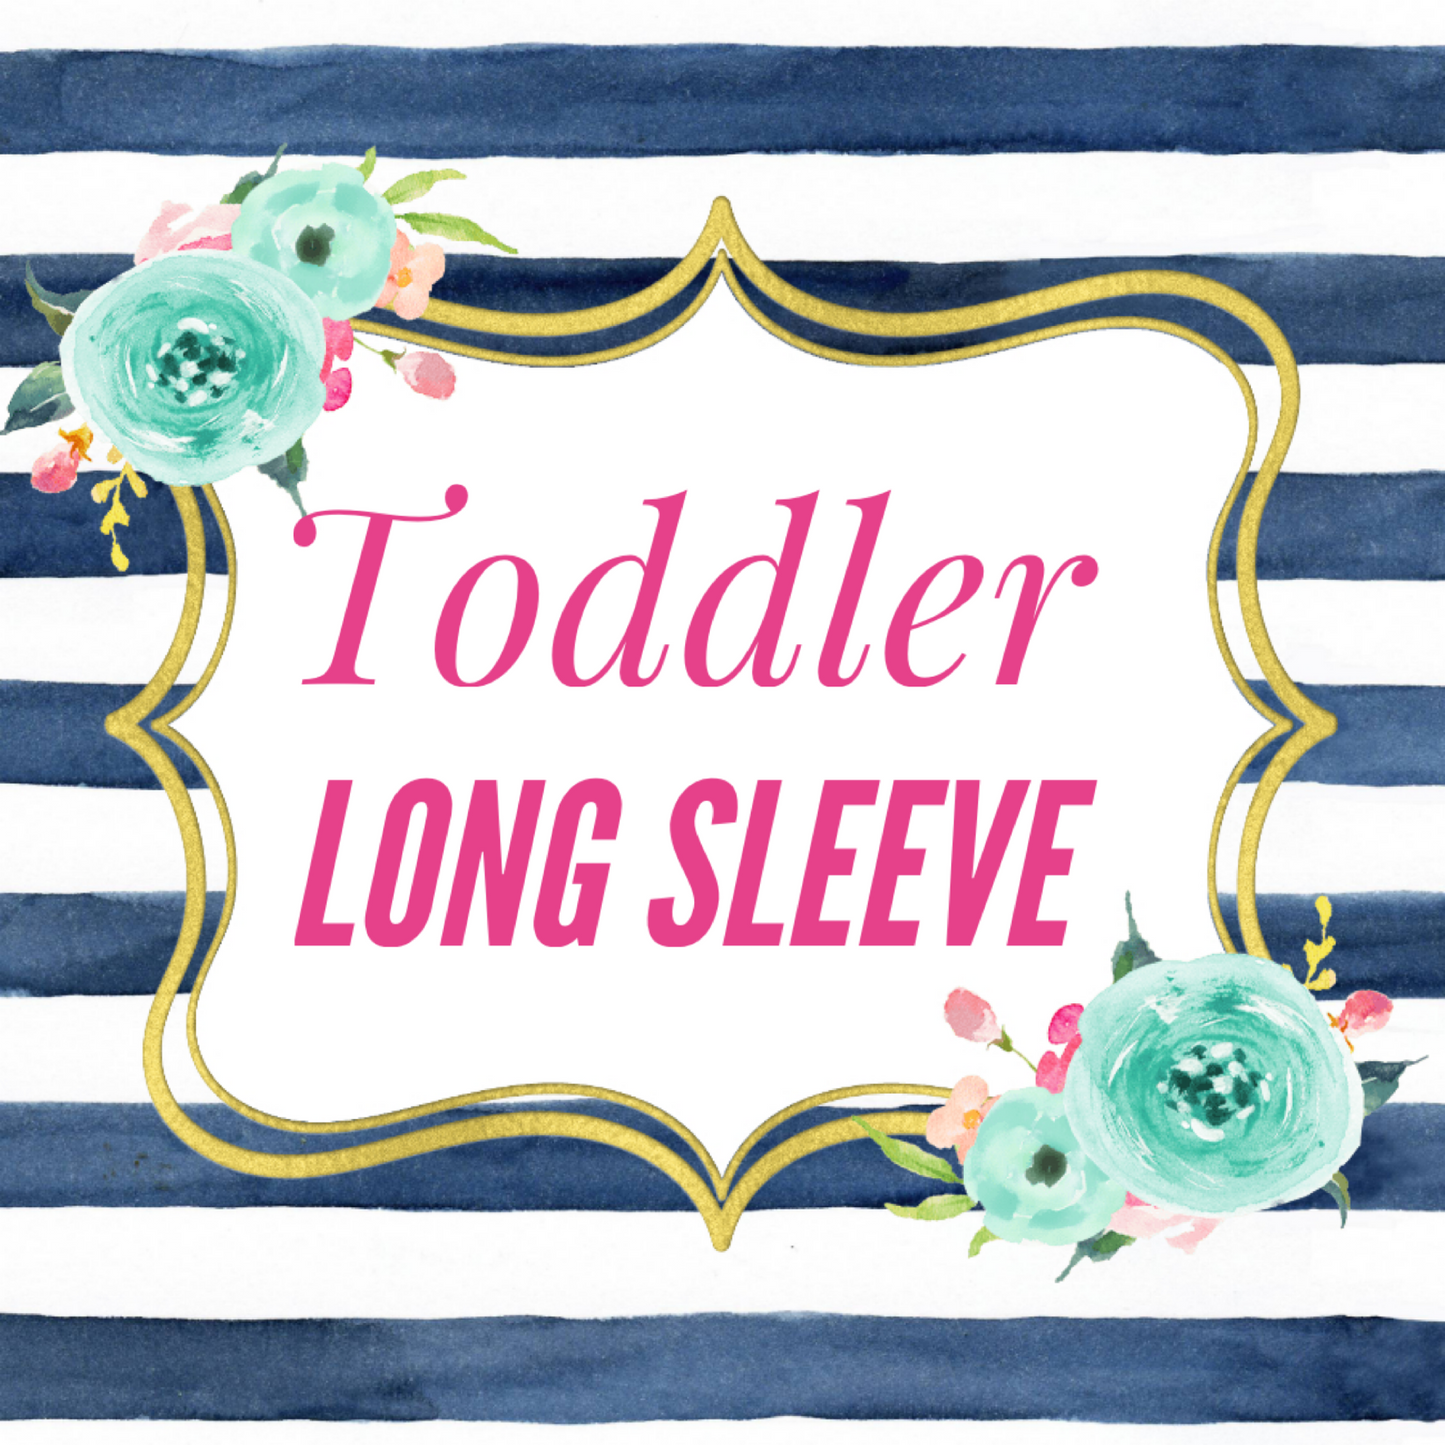 Toddler Long Sleeve (One Color) - $20